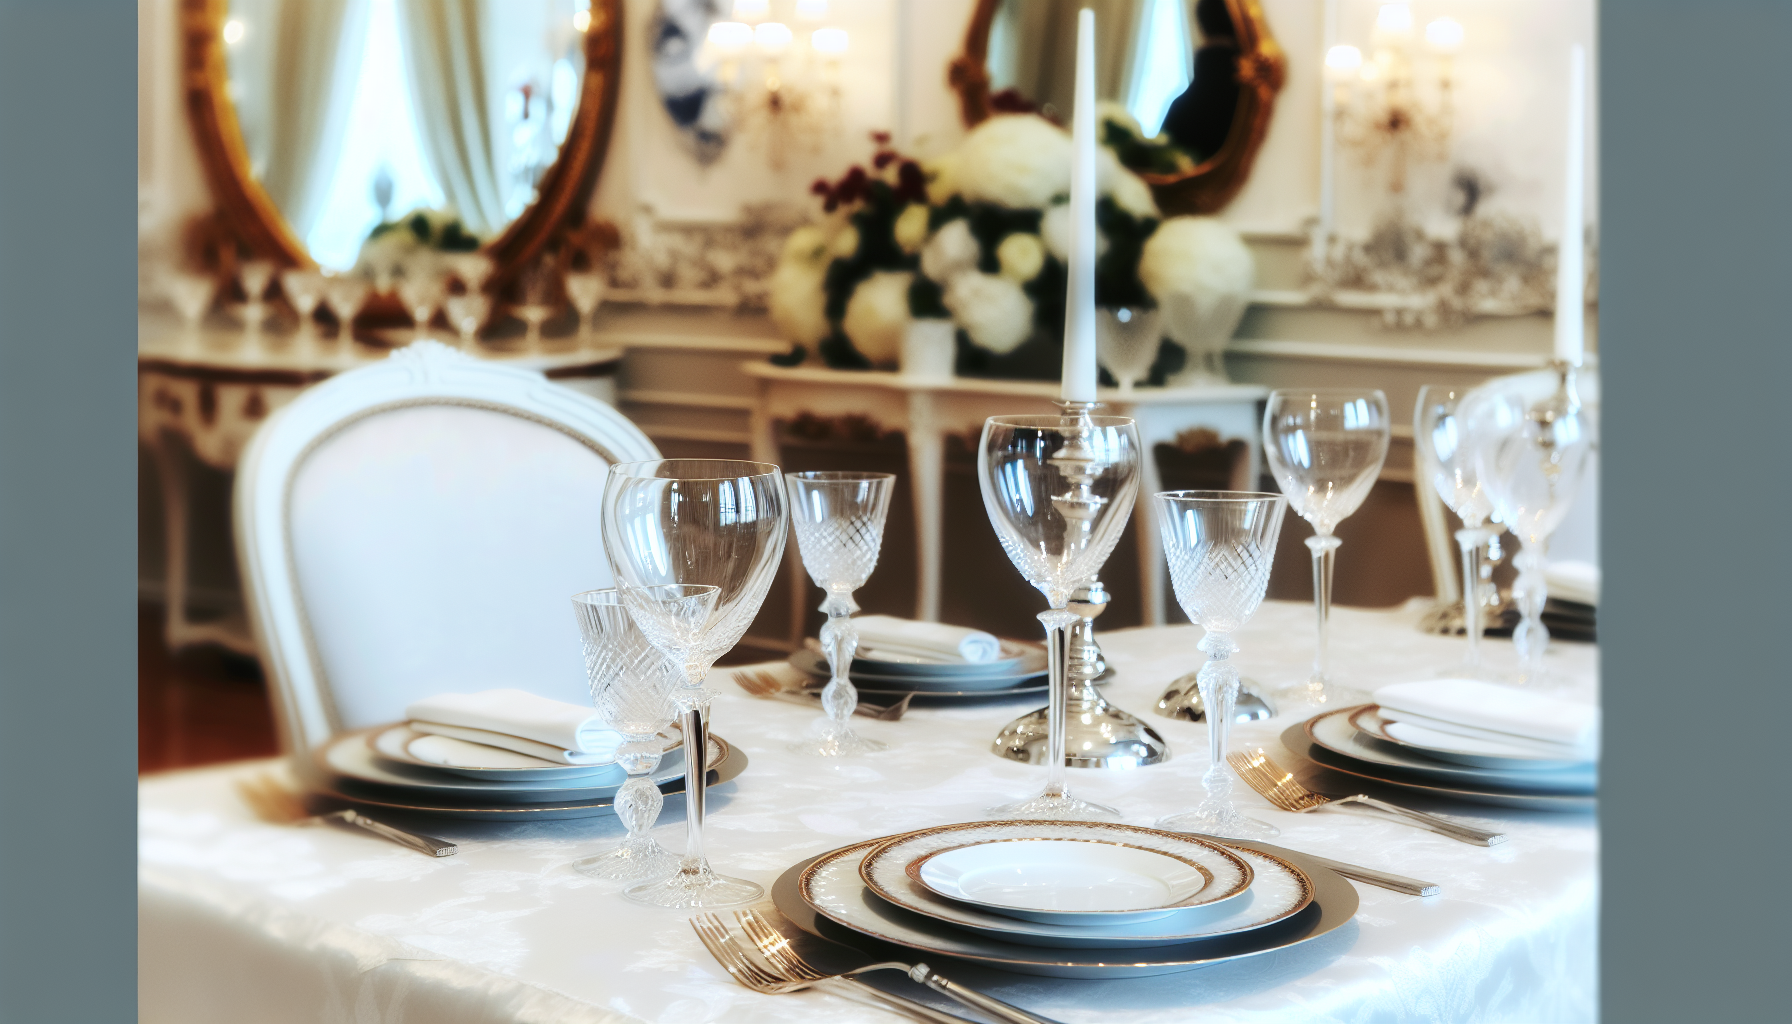 A beautifully set dining table with wine glasses, plates, and elegant cutlery